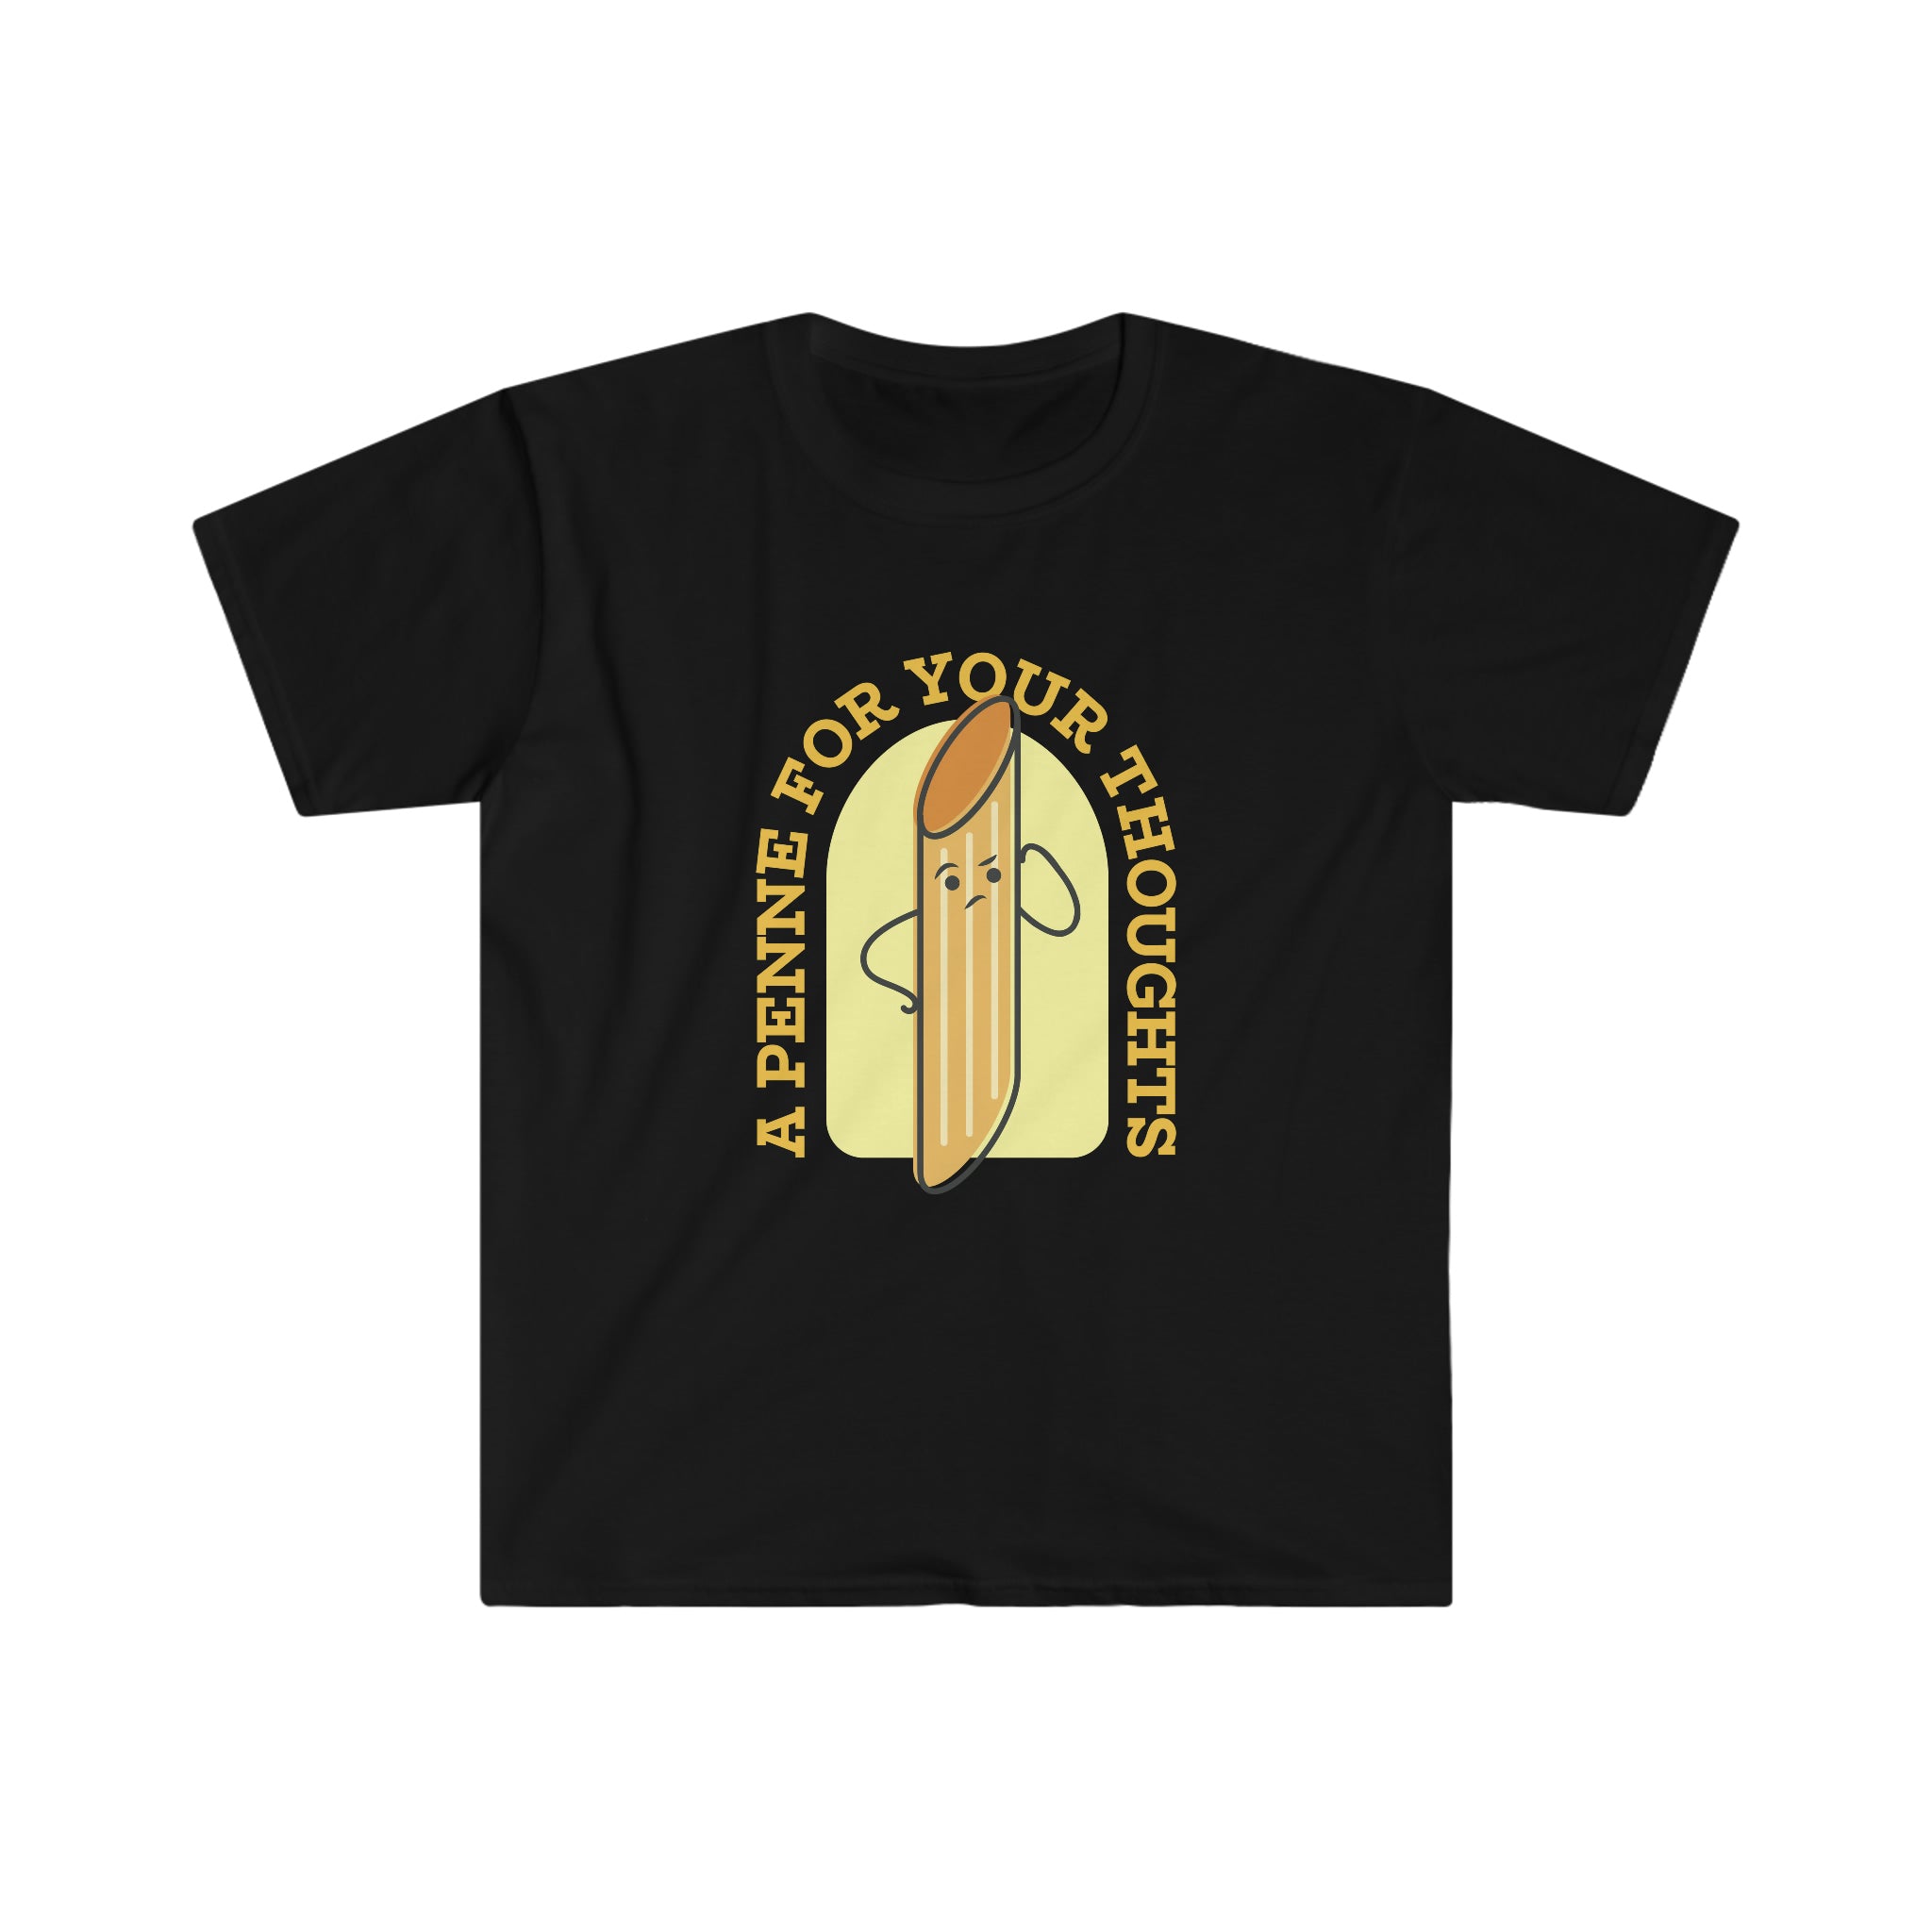 A black t - shirt with an image of "A Penne for your thoughts" on it.